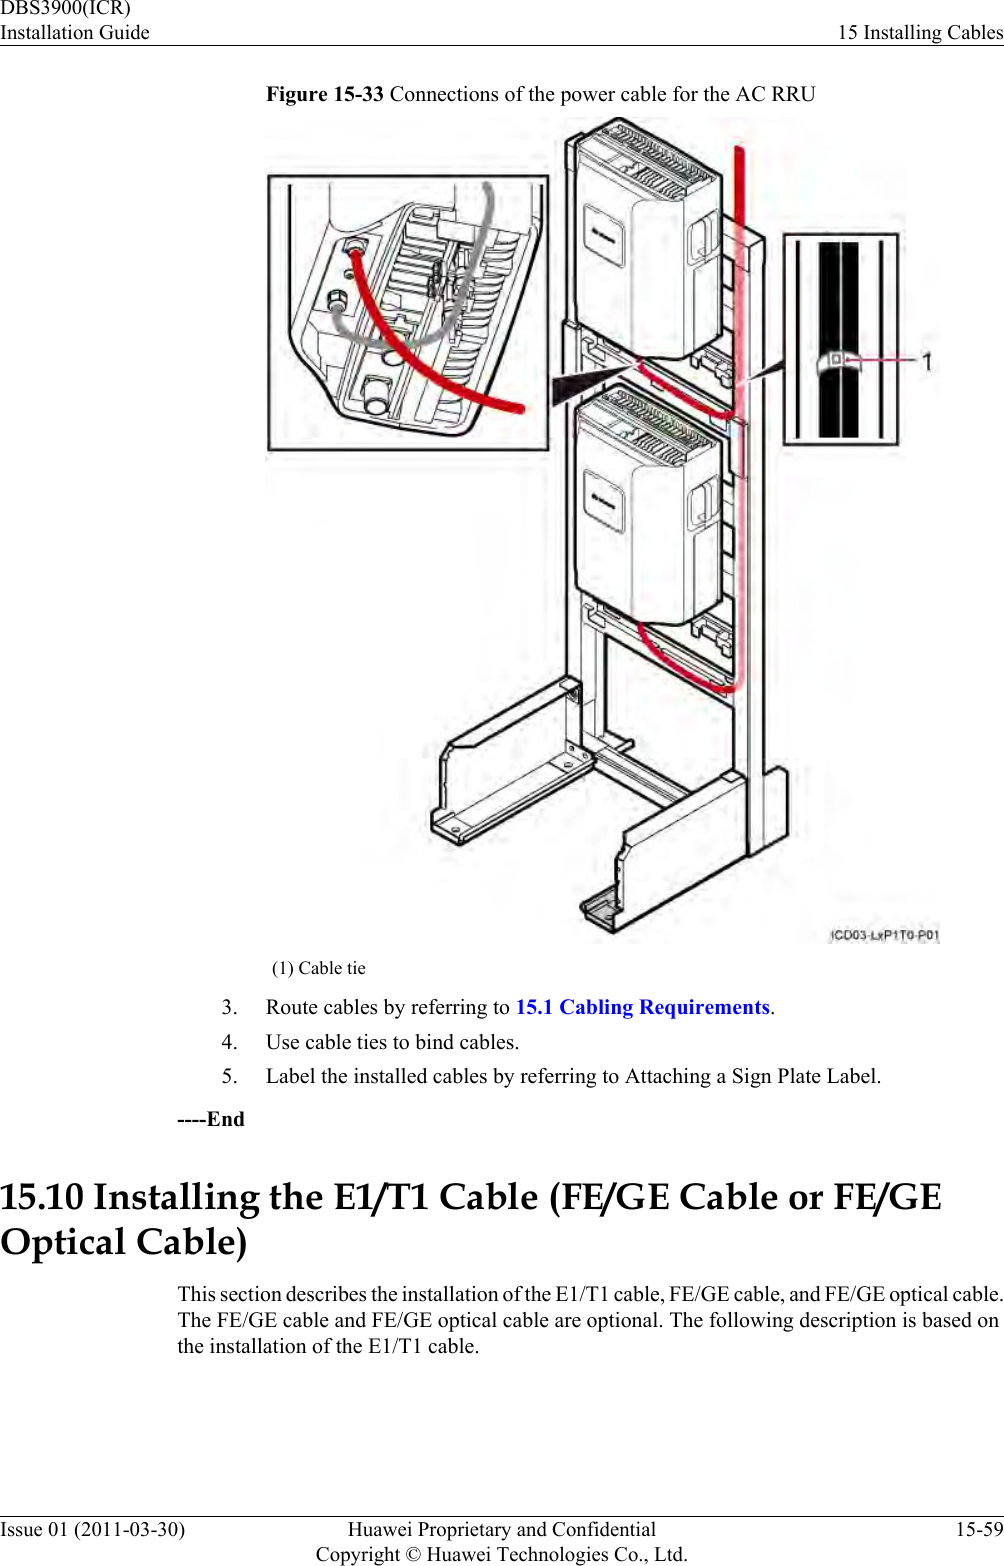 Figure 15-33 Connections of the power cable for the AC RRU(1) Cable tie3. Route cables by referring to 15.1 Cabling Requirements.4. Use cable ties to bind cables.5. Label the installed cables by referring to Attaching a Sign Plate Label.----End15.10 Installing the E1/T1 Cable (FE/GE Cable or FE/GEOptical Cable)This section describes the installation of the E1/T1 cable, FE/GE cable, and FE/GE optical cable.The FE/GE cable and FE/GE optical cable are optional. The following description is based onthe installation of the E1/T1 cable.DBS3900(ICR)Installation Guide 15 Installing CablesIssue 01 (2011-03-30) Huawei Proprietary and ConfidentialCopyright © Huawei Technologies Co., Ltd.15-59